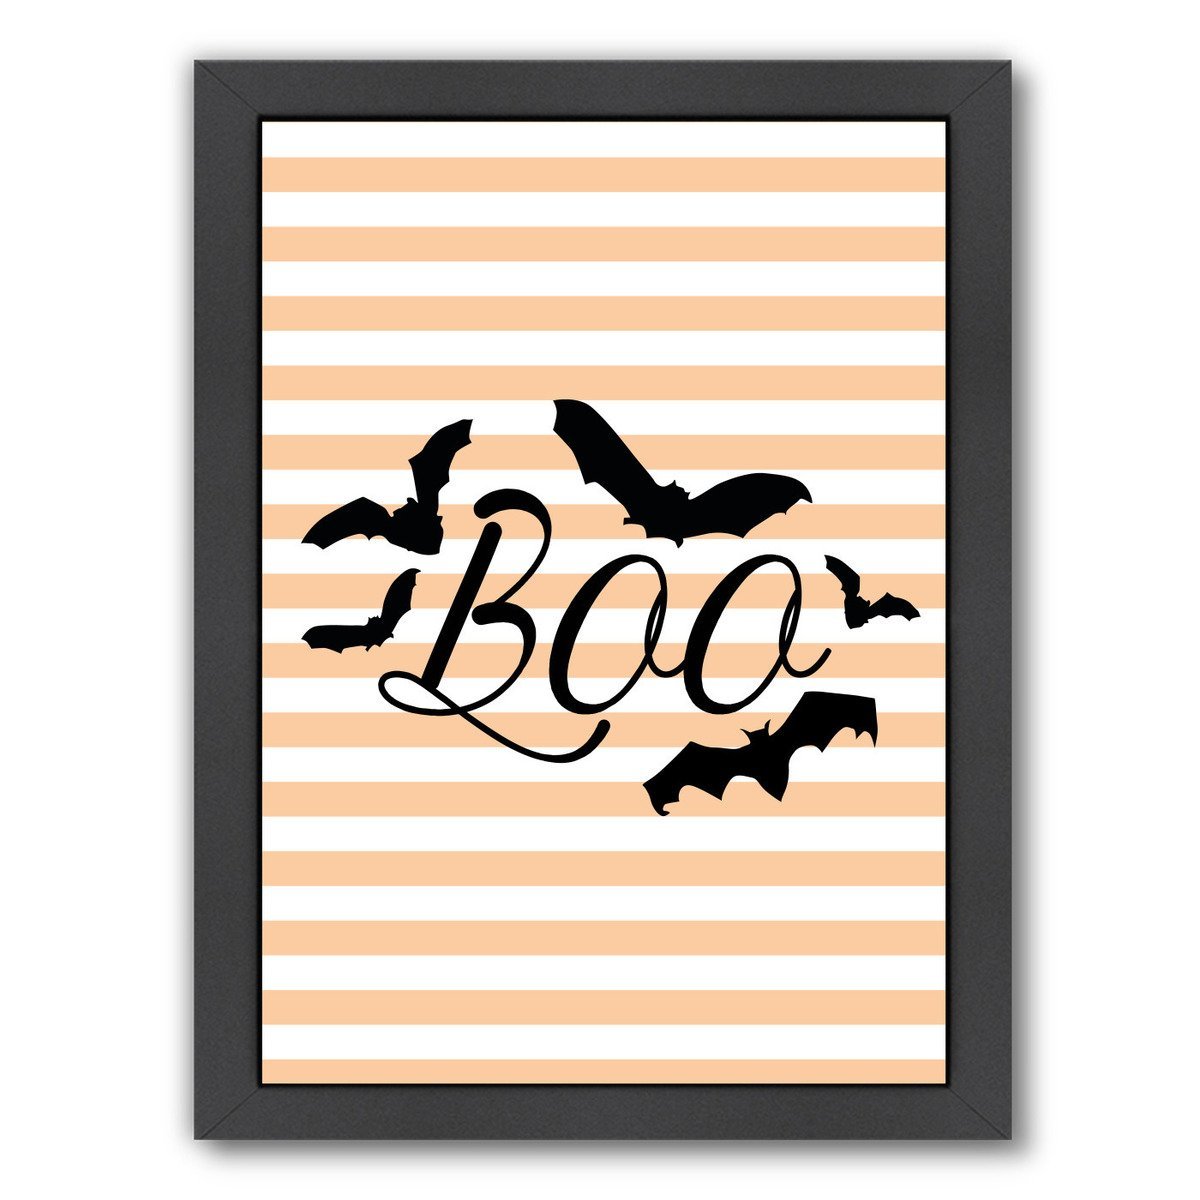 Boo With Bats by Jetty Printables Framed Print - Americanflat